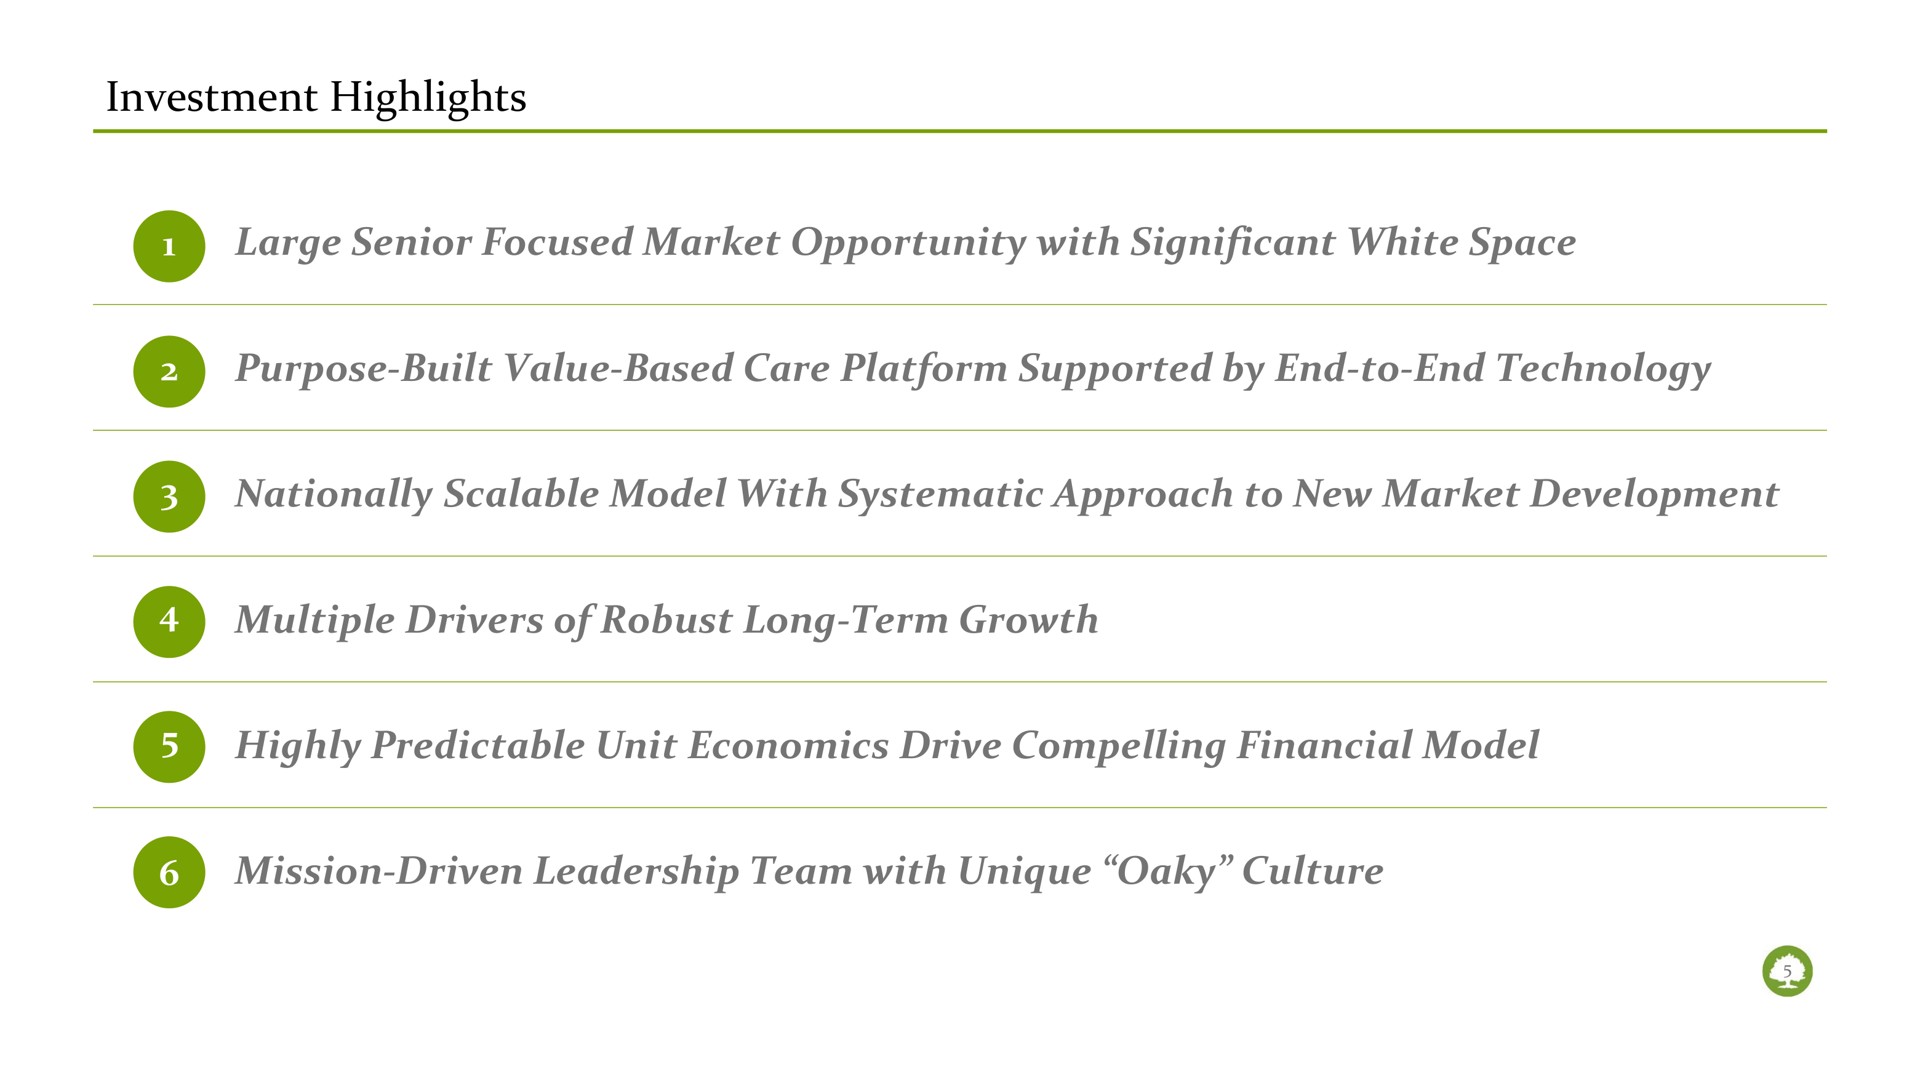 investment highlights large senior focused market opportunity with significant white space purpose built value based care platform supported by end to end technology nationally scalable model with systematic approach to new market development multiple drivers of robust long term growth highly predictable unit economics drive compelling financial model mission driven leadership team with unique oaky culture | Oak Street Health